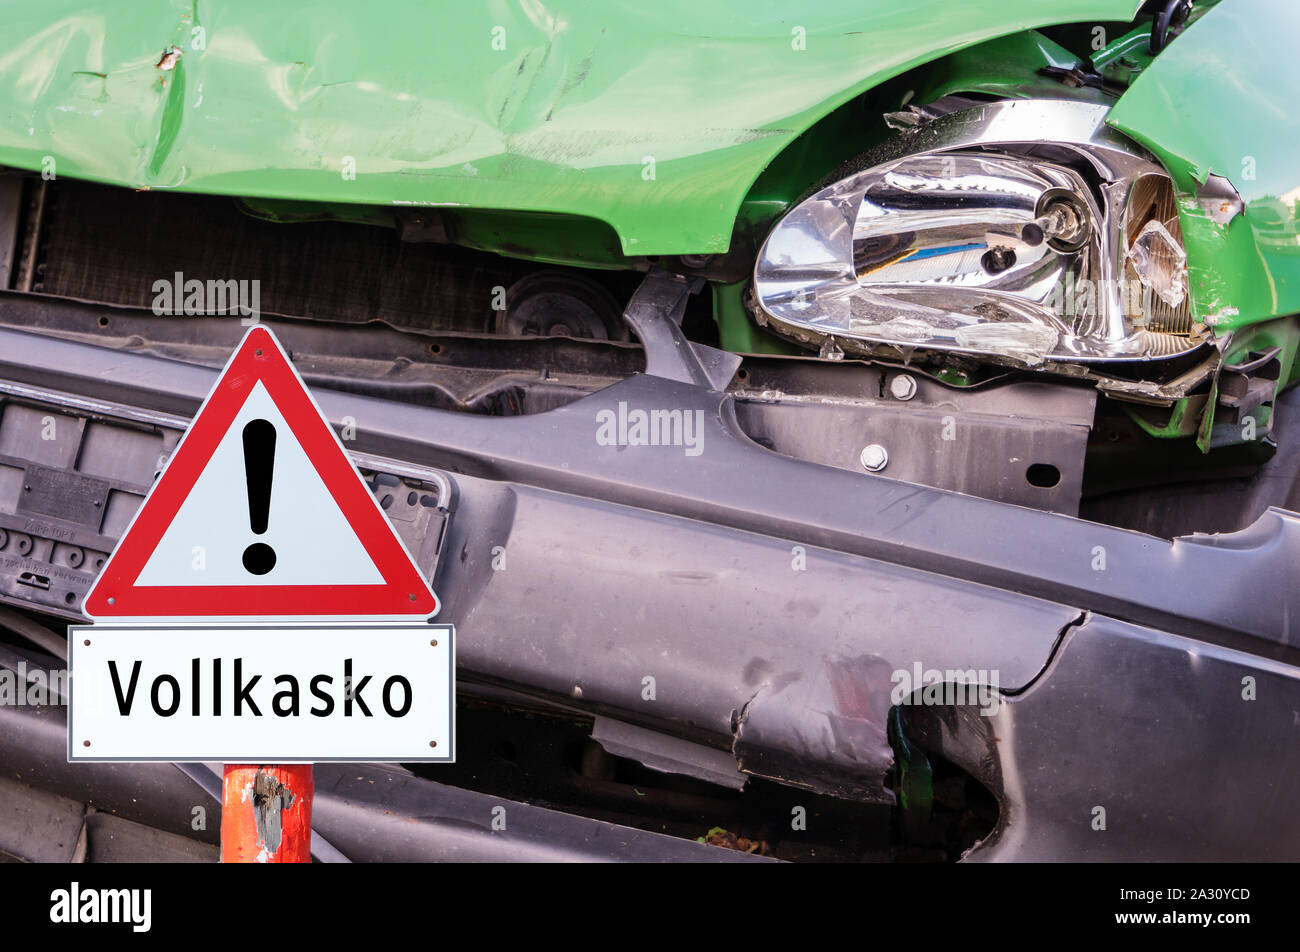 Car accident full insurance warning sign Stock Photo